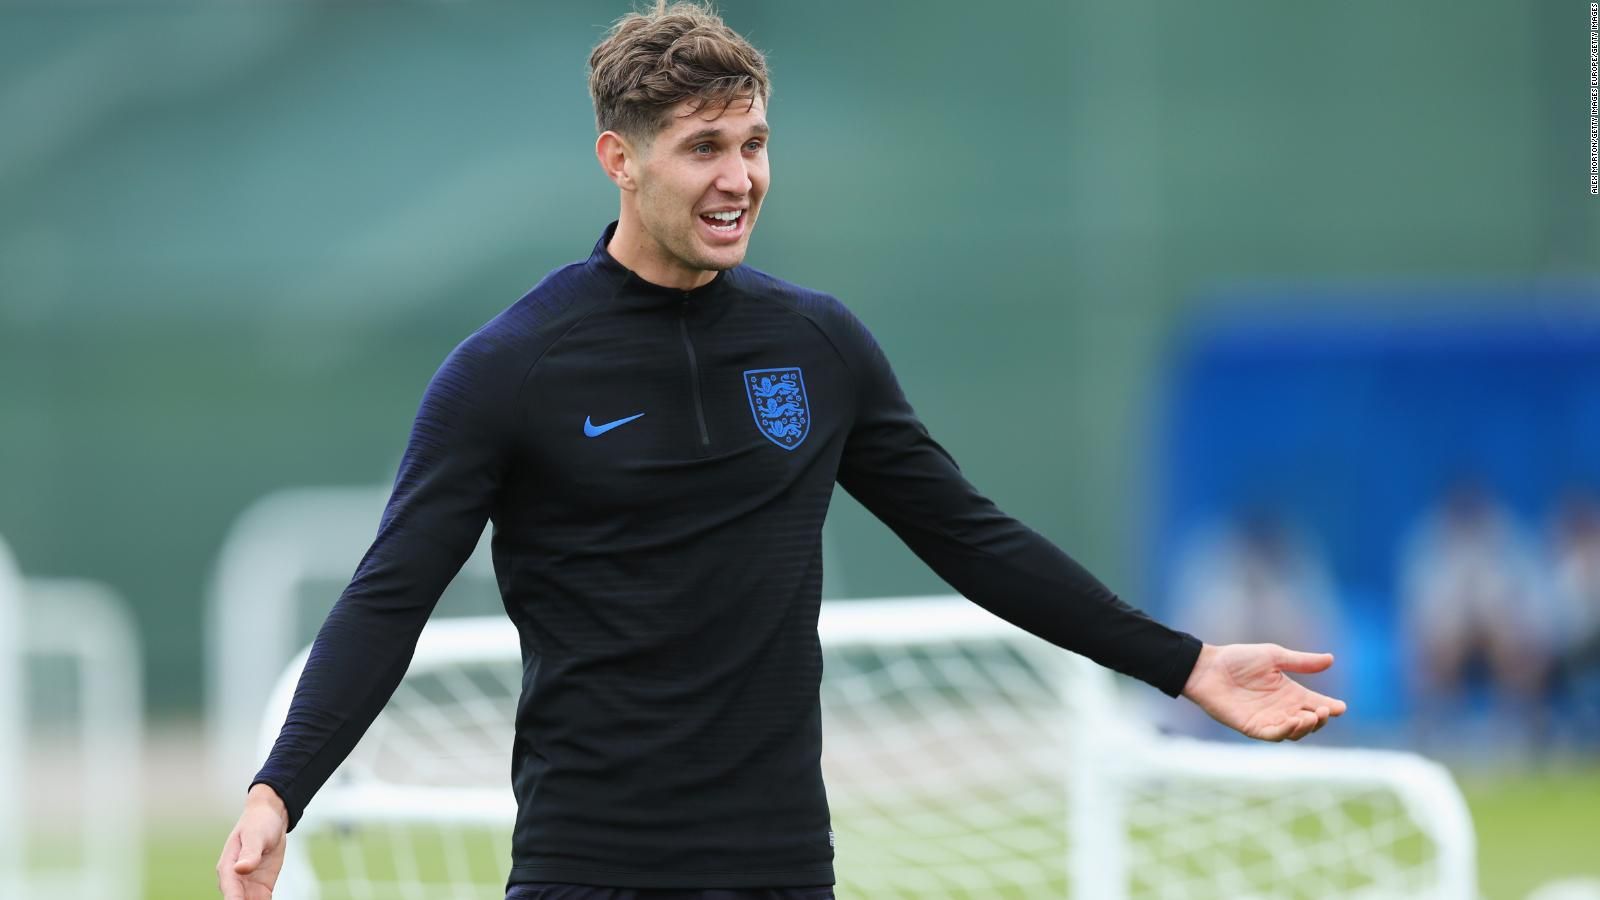 COPA90: John Stones on England & the World Cup